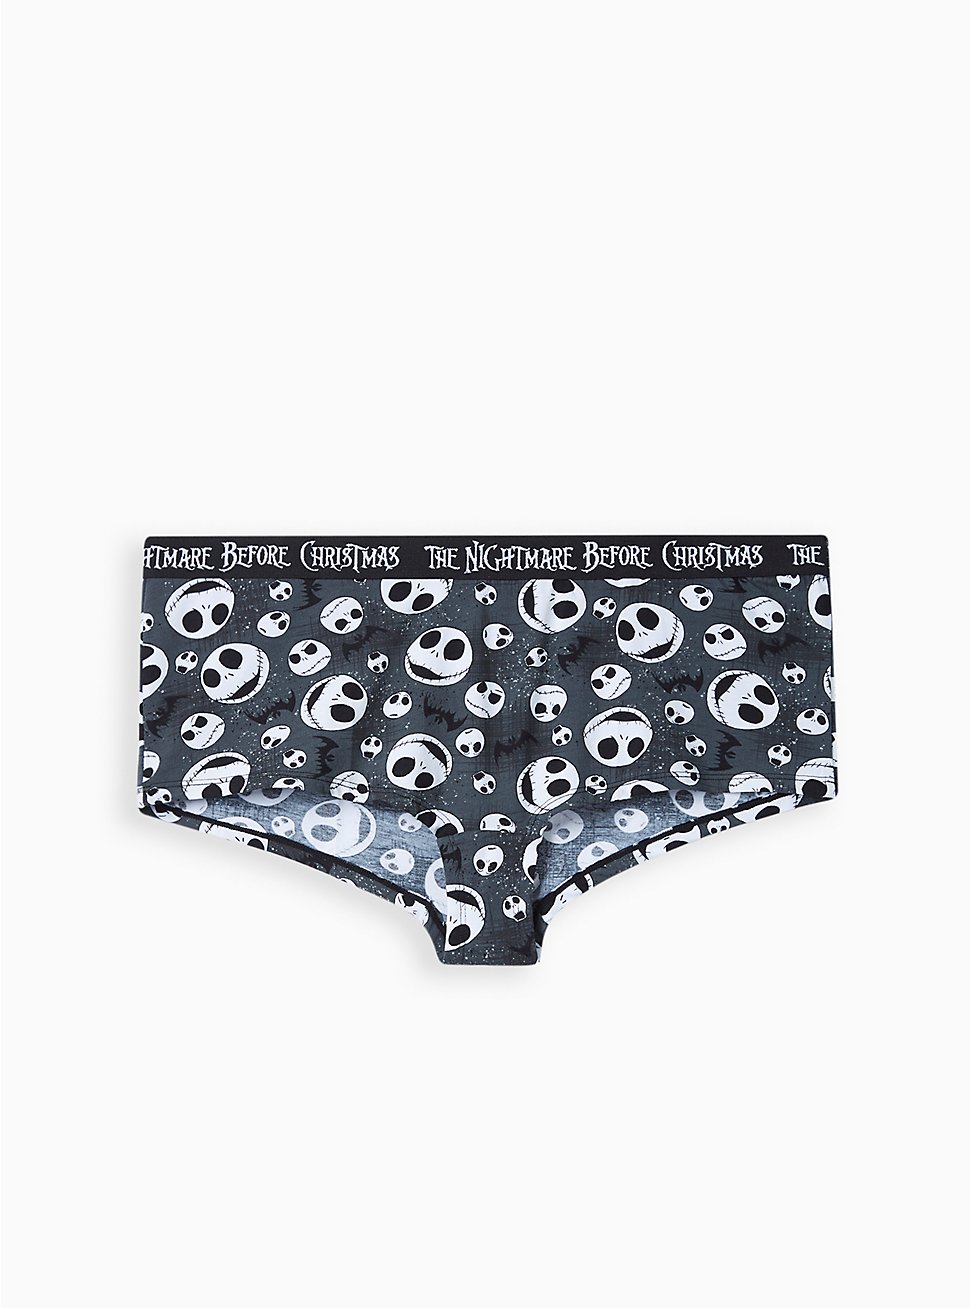 Plus Size The Nightmare Before Christmas Cheeky Panty - Cotton Jack Black, MULTI, hi-res